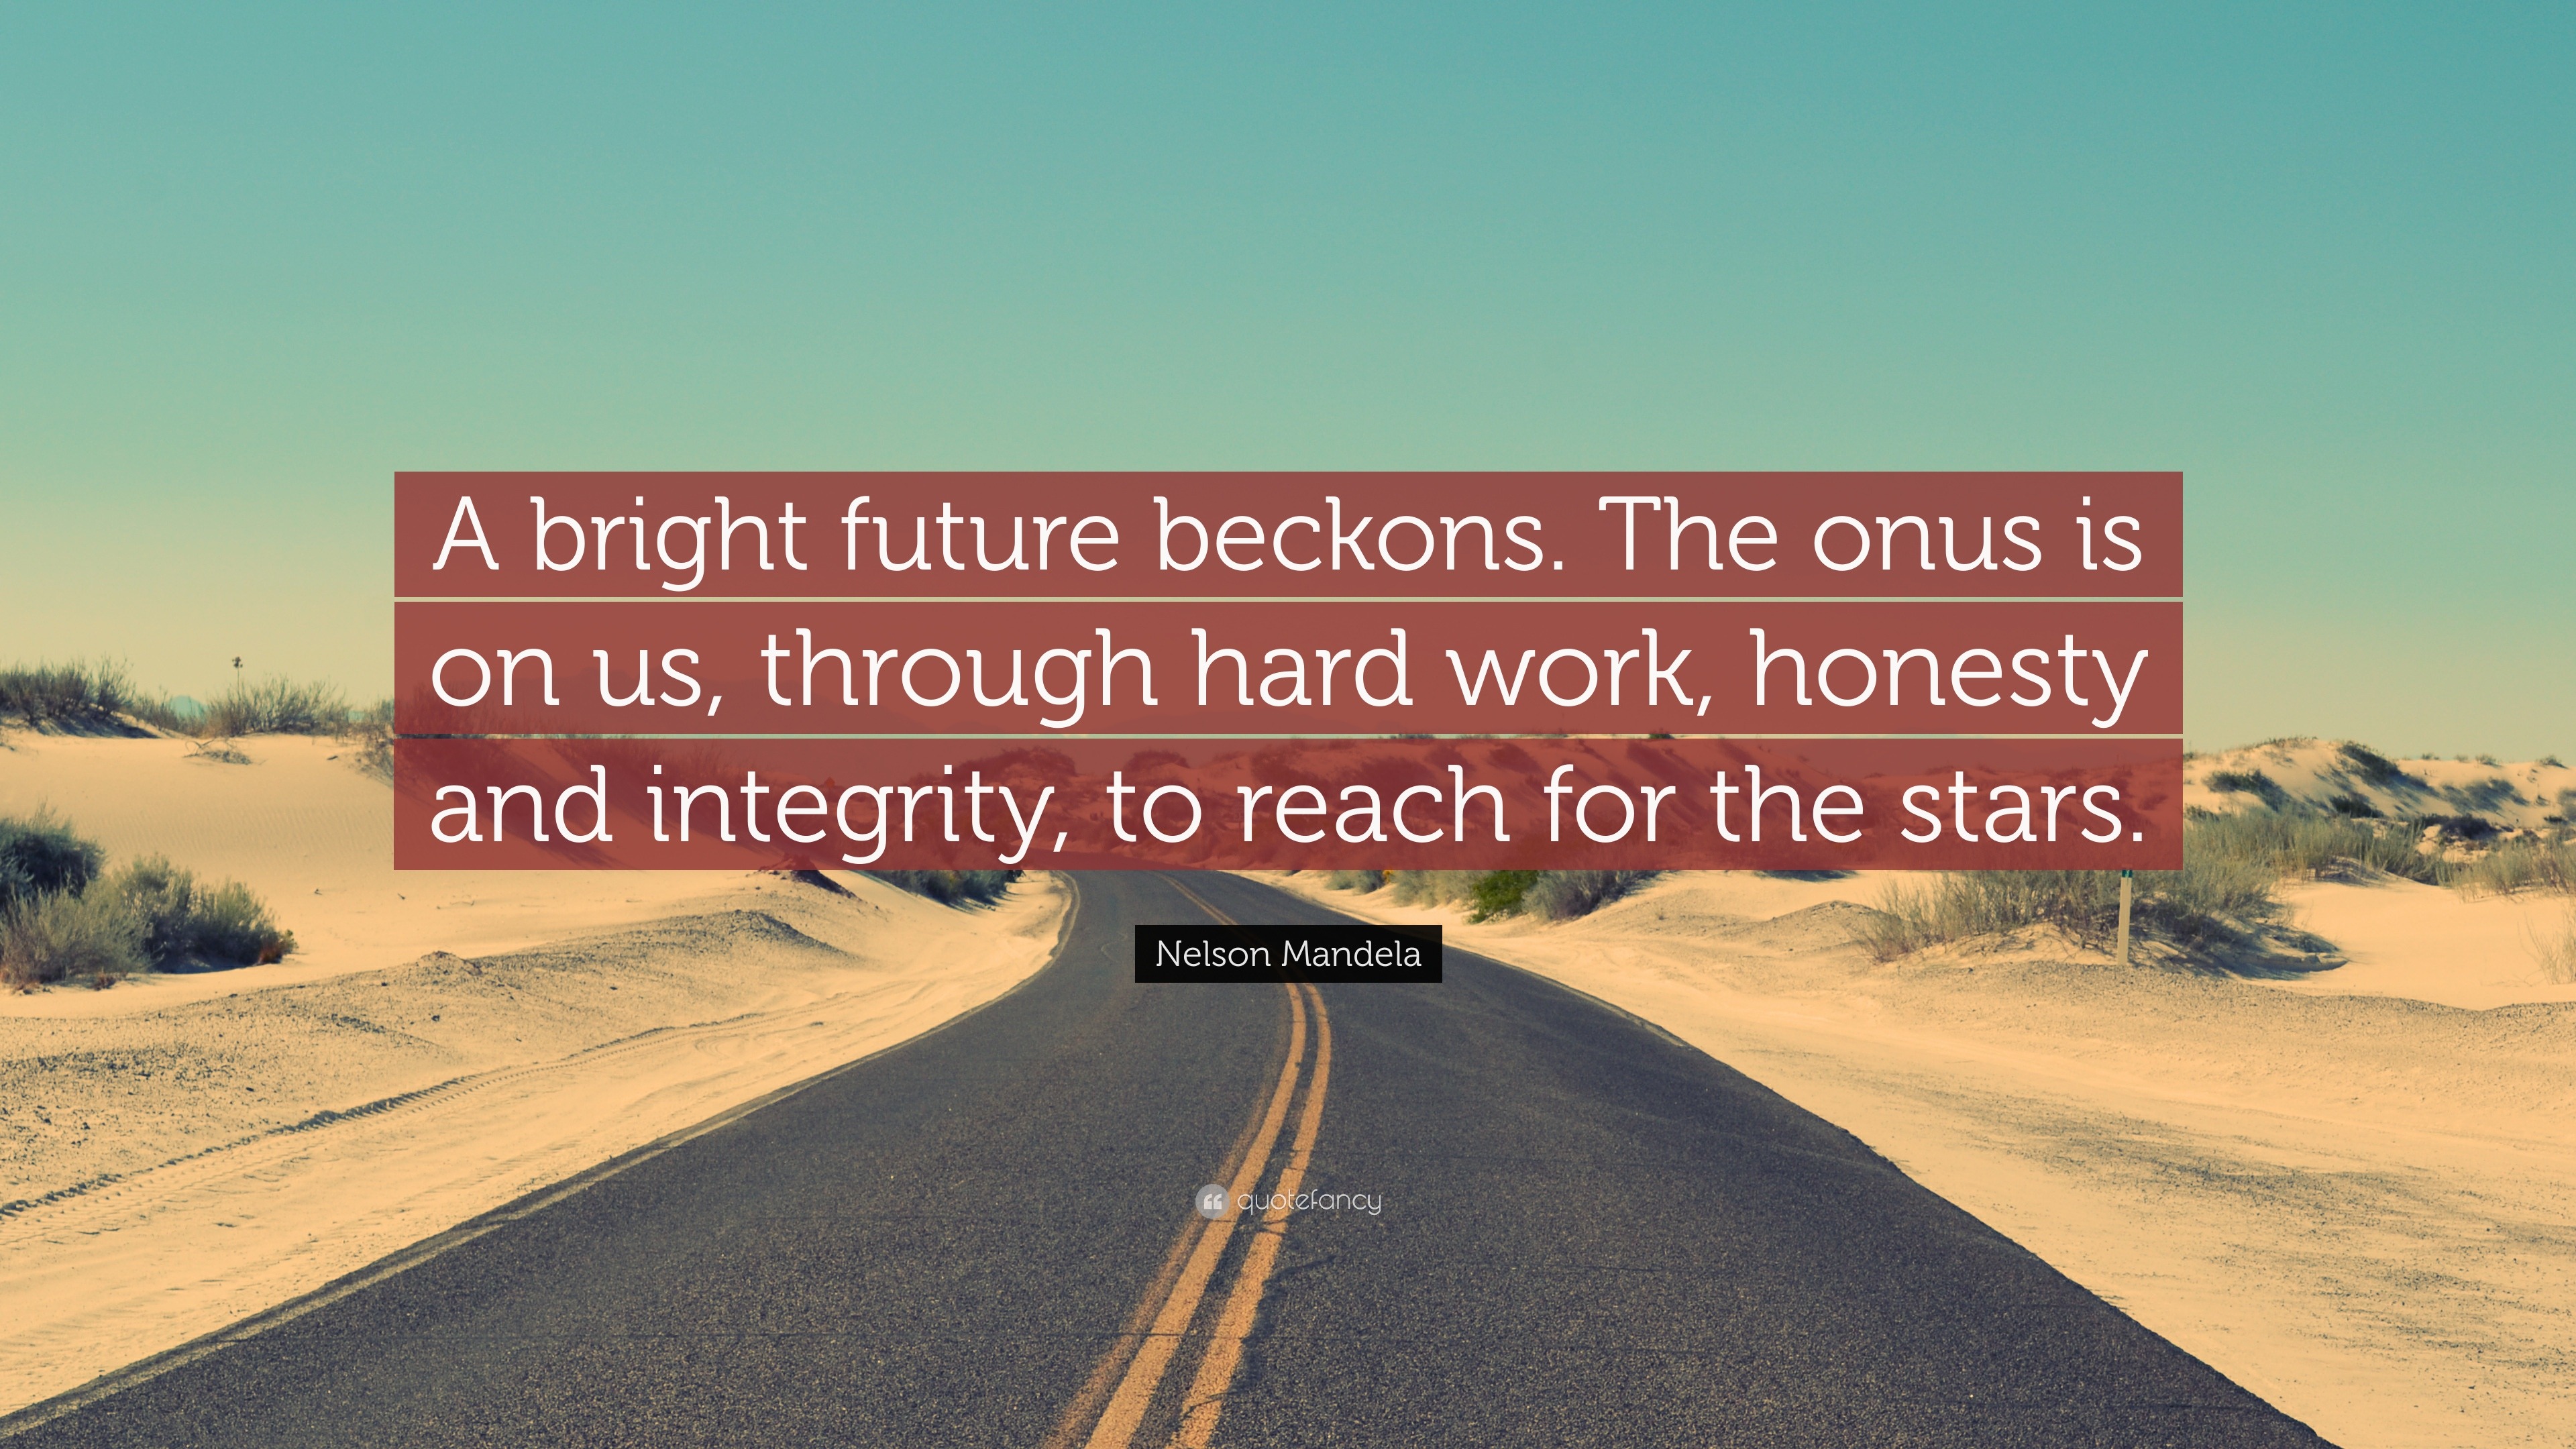 Nelson Mandela Quote: “A bright future beckons. The onus is on us